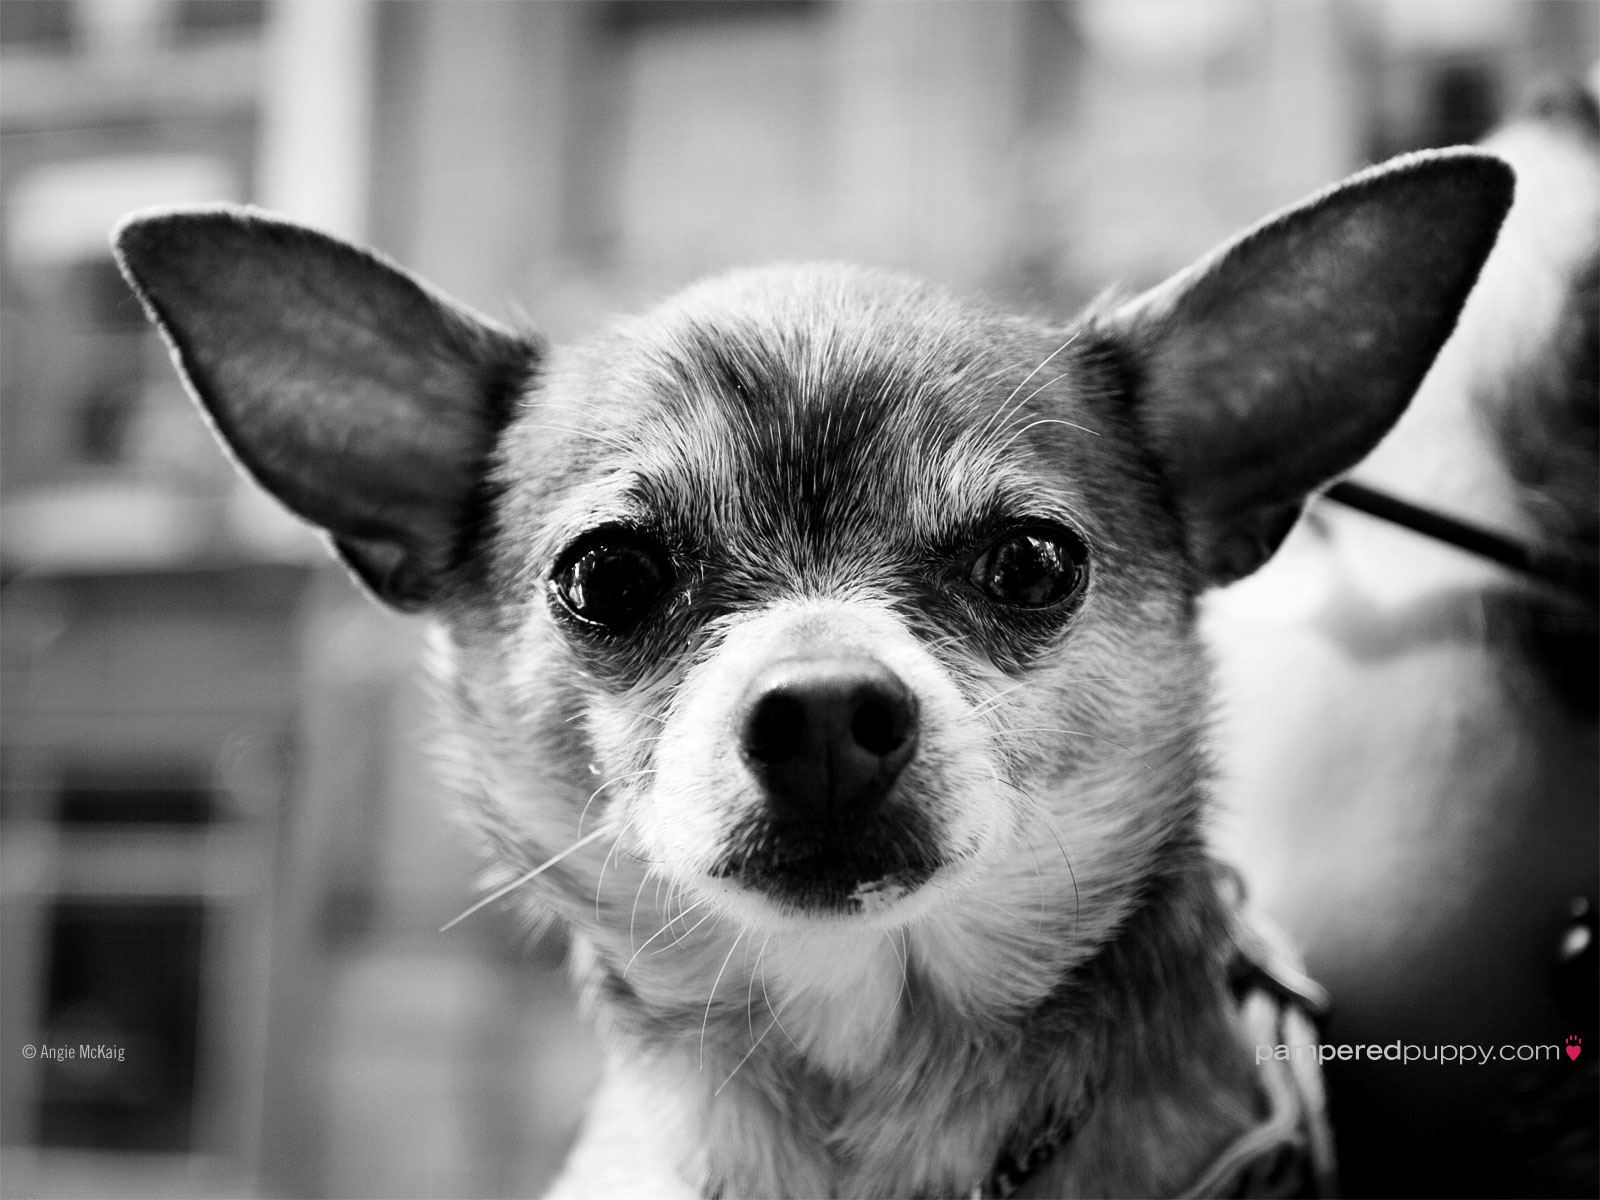 Black And White Dog Image Widescreen HD Wallpaper